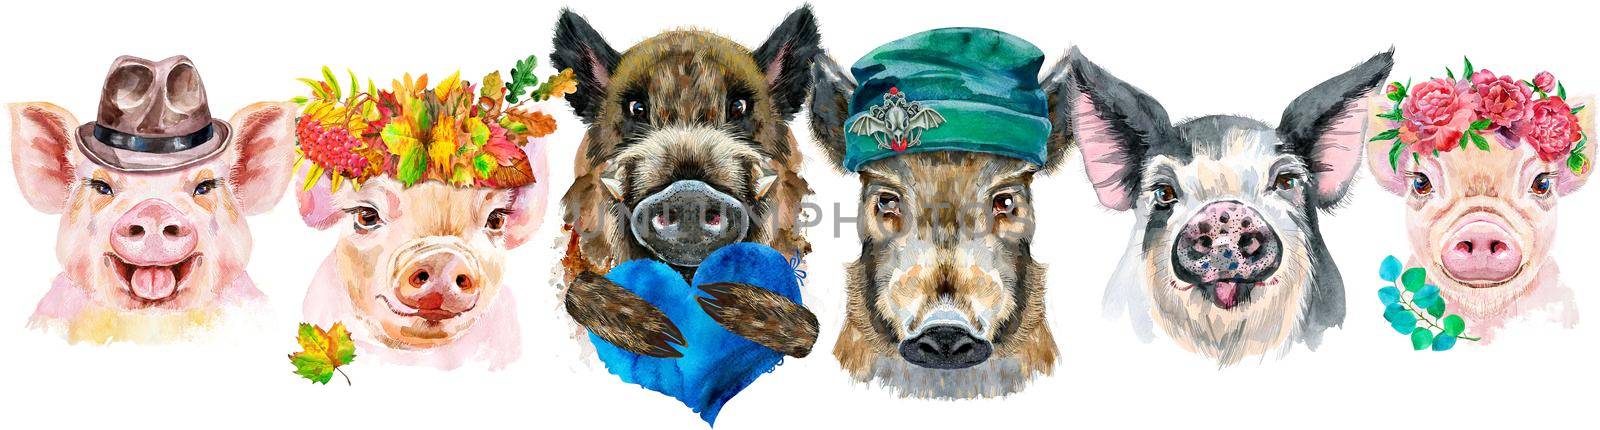 Cute border from watercolor portraits of pigs. Watercolor illustration of pigs in wreath of autumn leaves, wreath of peonies, beanie, brown hat, with blue heart